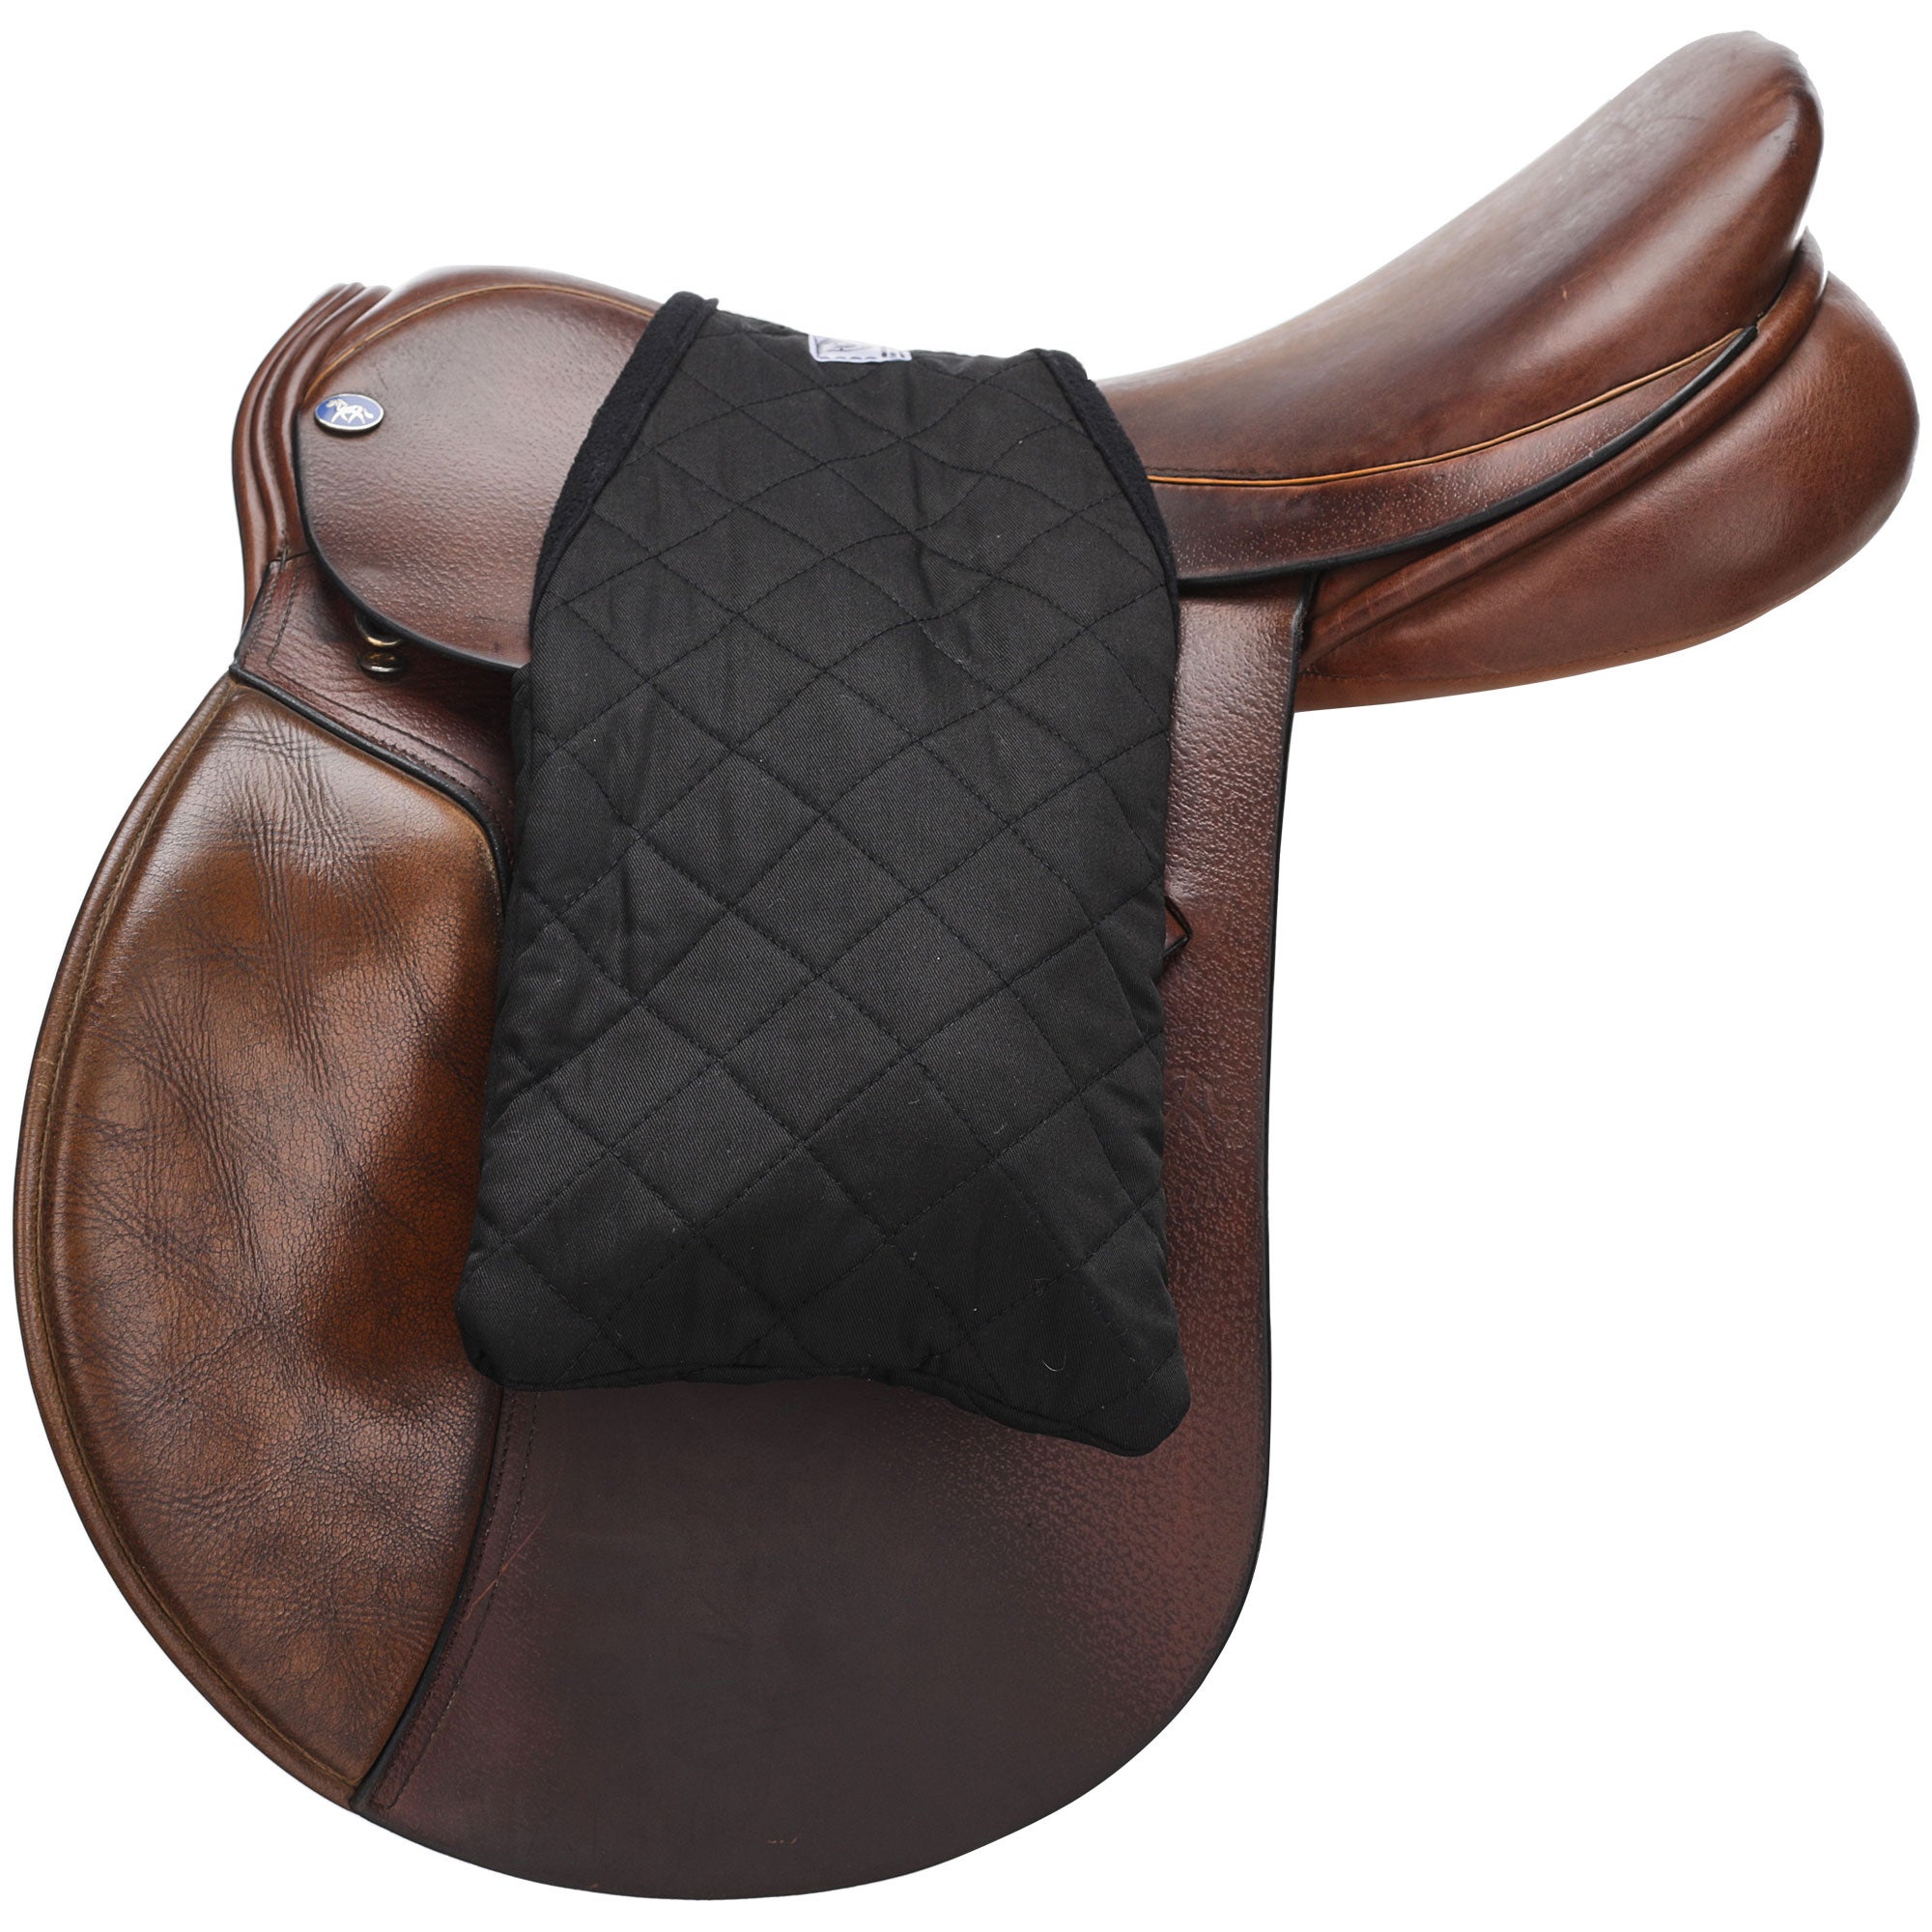 Stirrup Covers to help protect your saddle